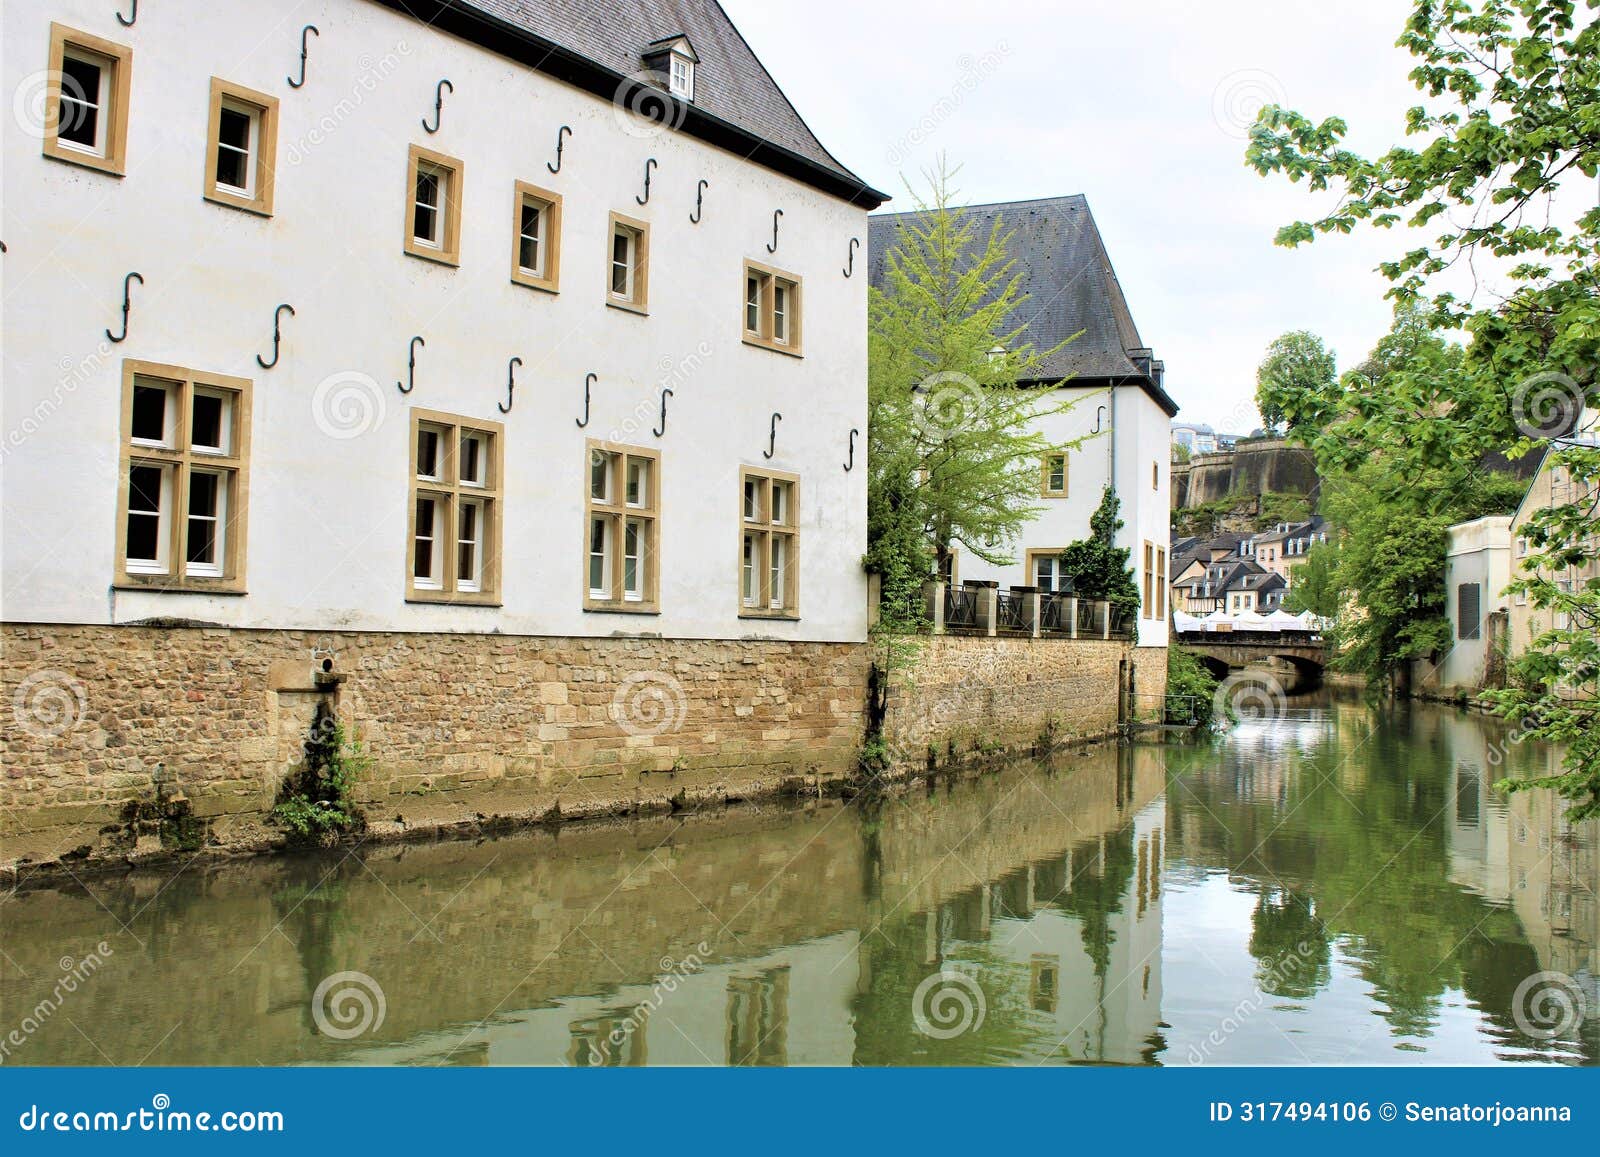 the alzette river crossing the grund, an old district in luxembourg city